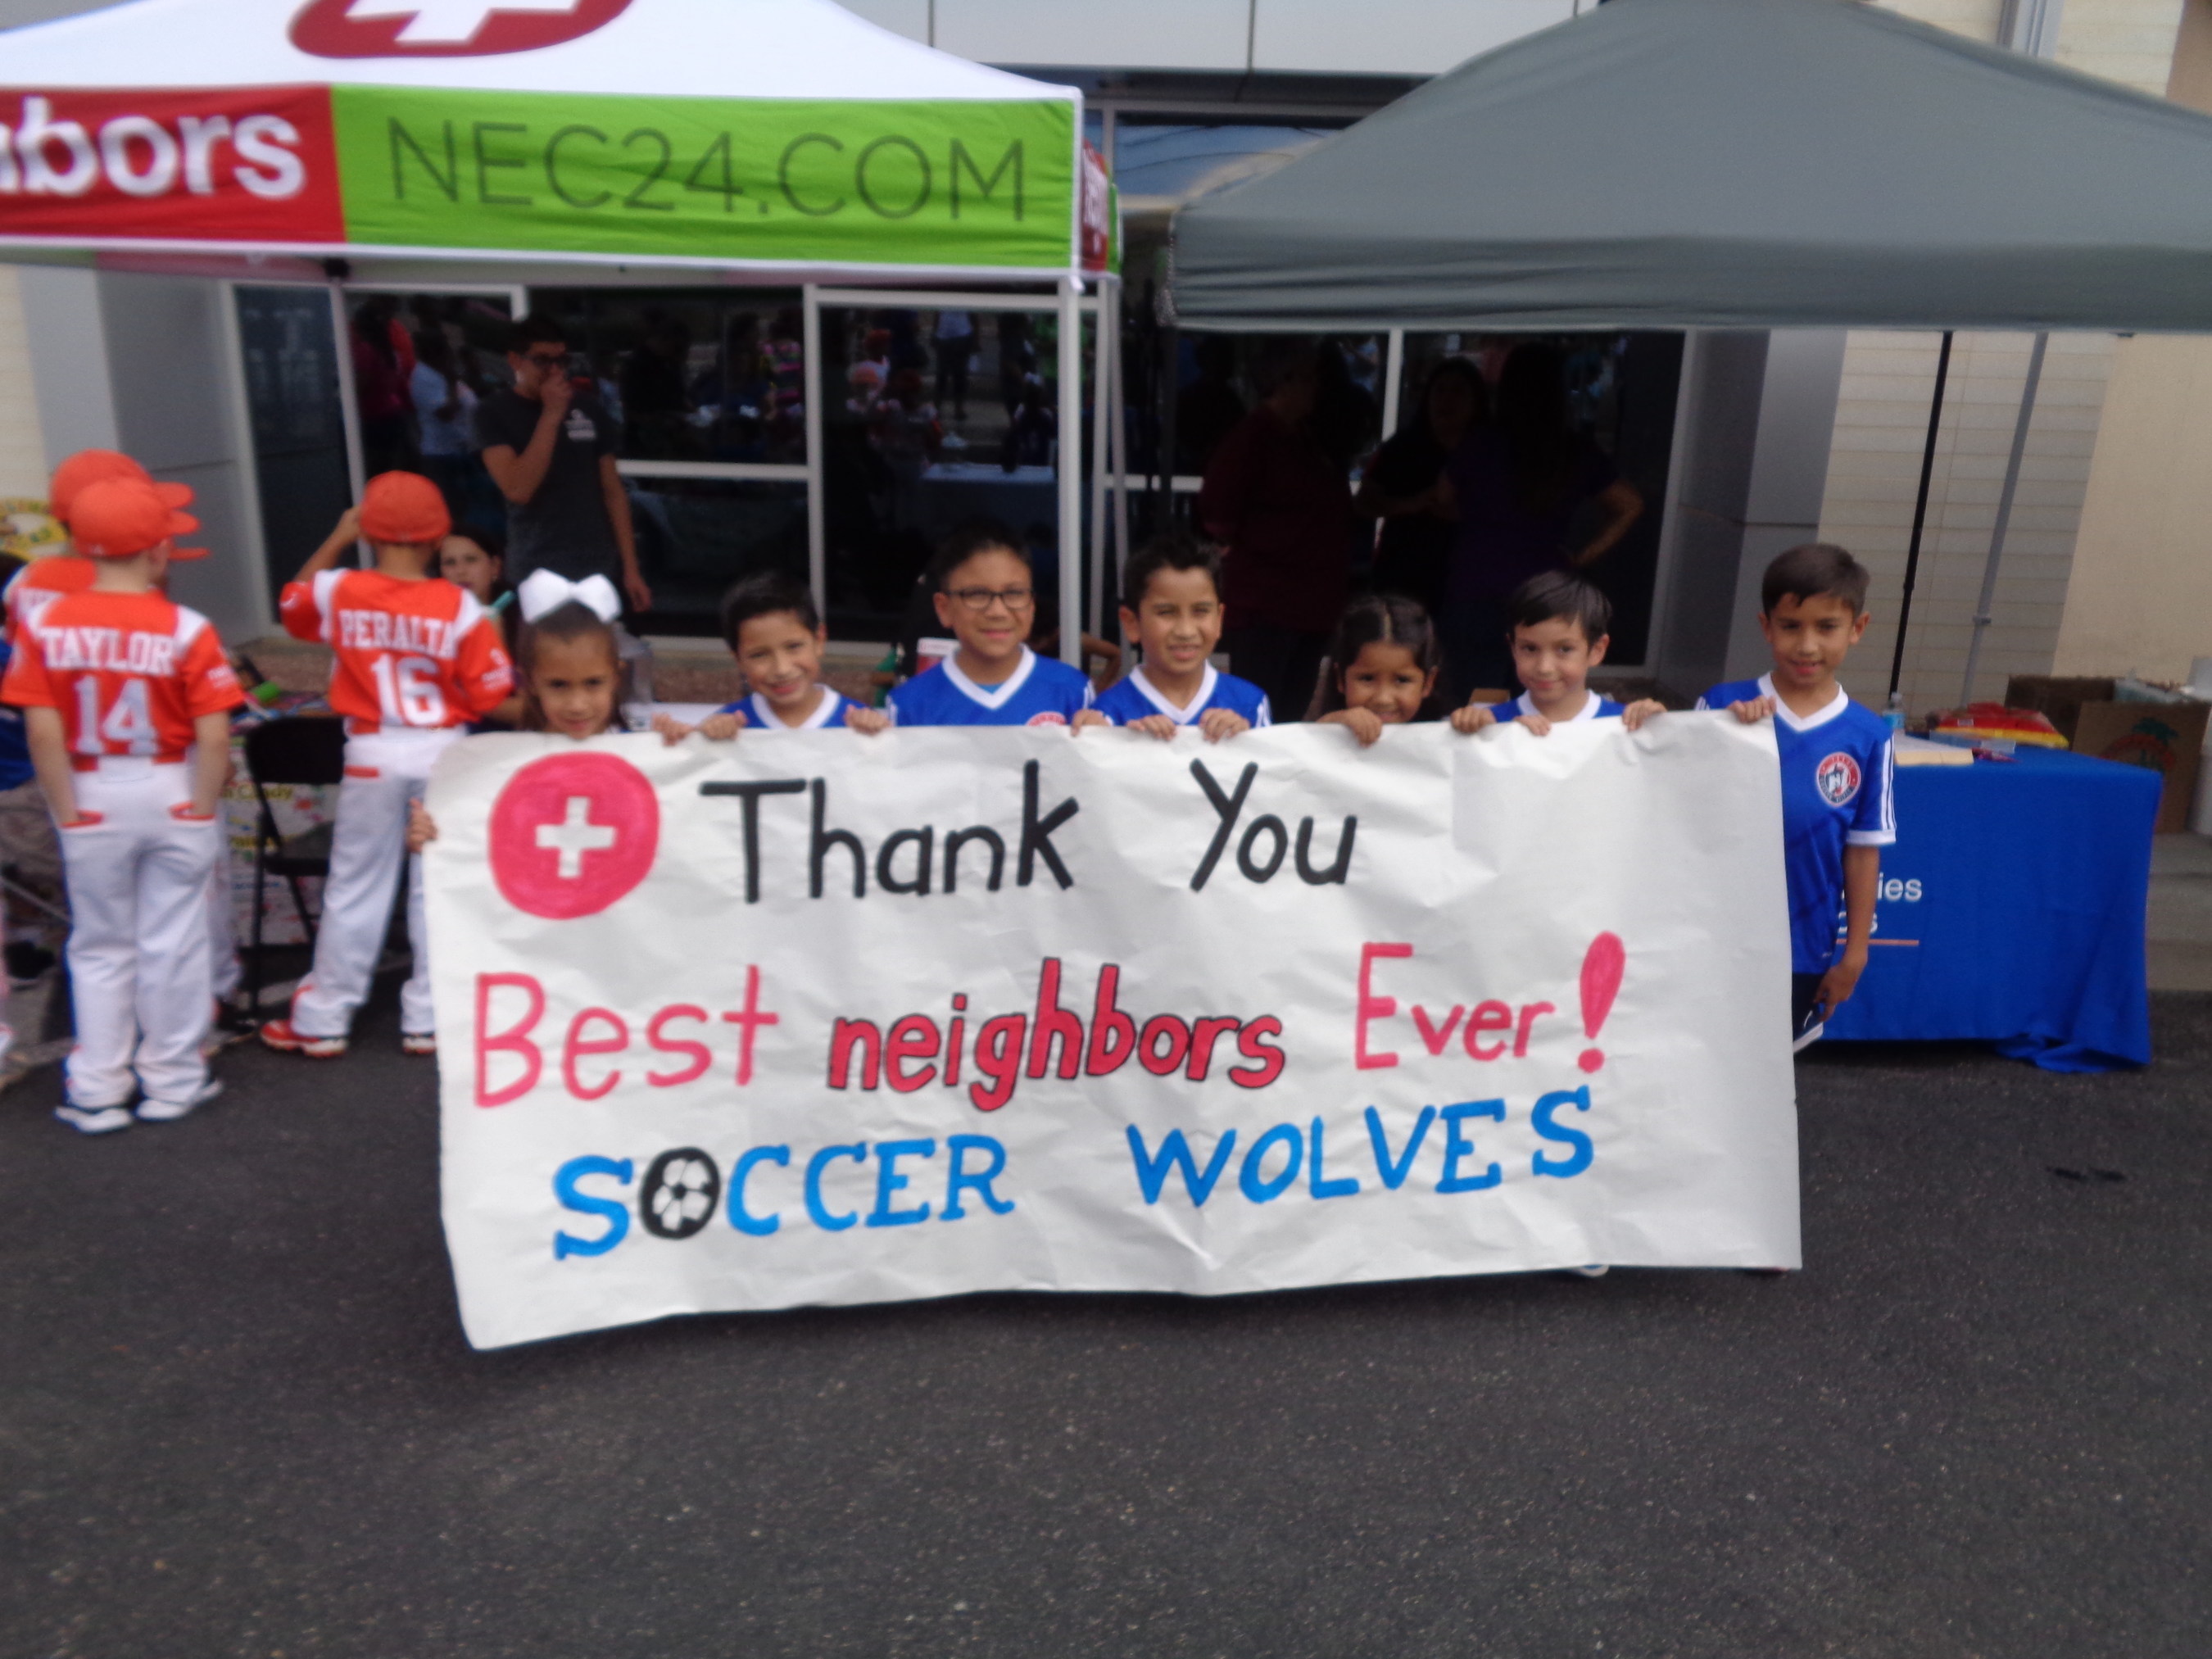 Local children's soccer teams thank the Zaragoza Neighbors Emergency Center location for their support.